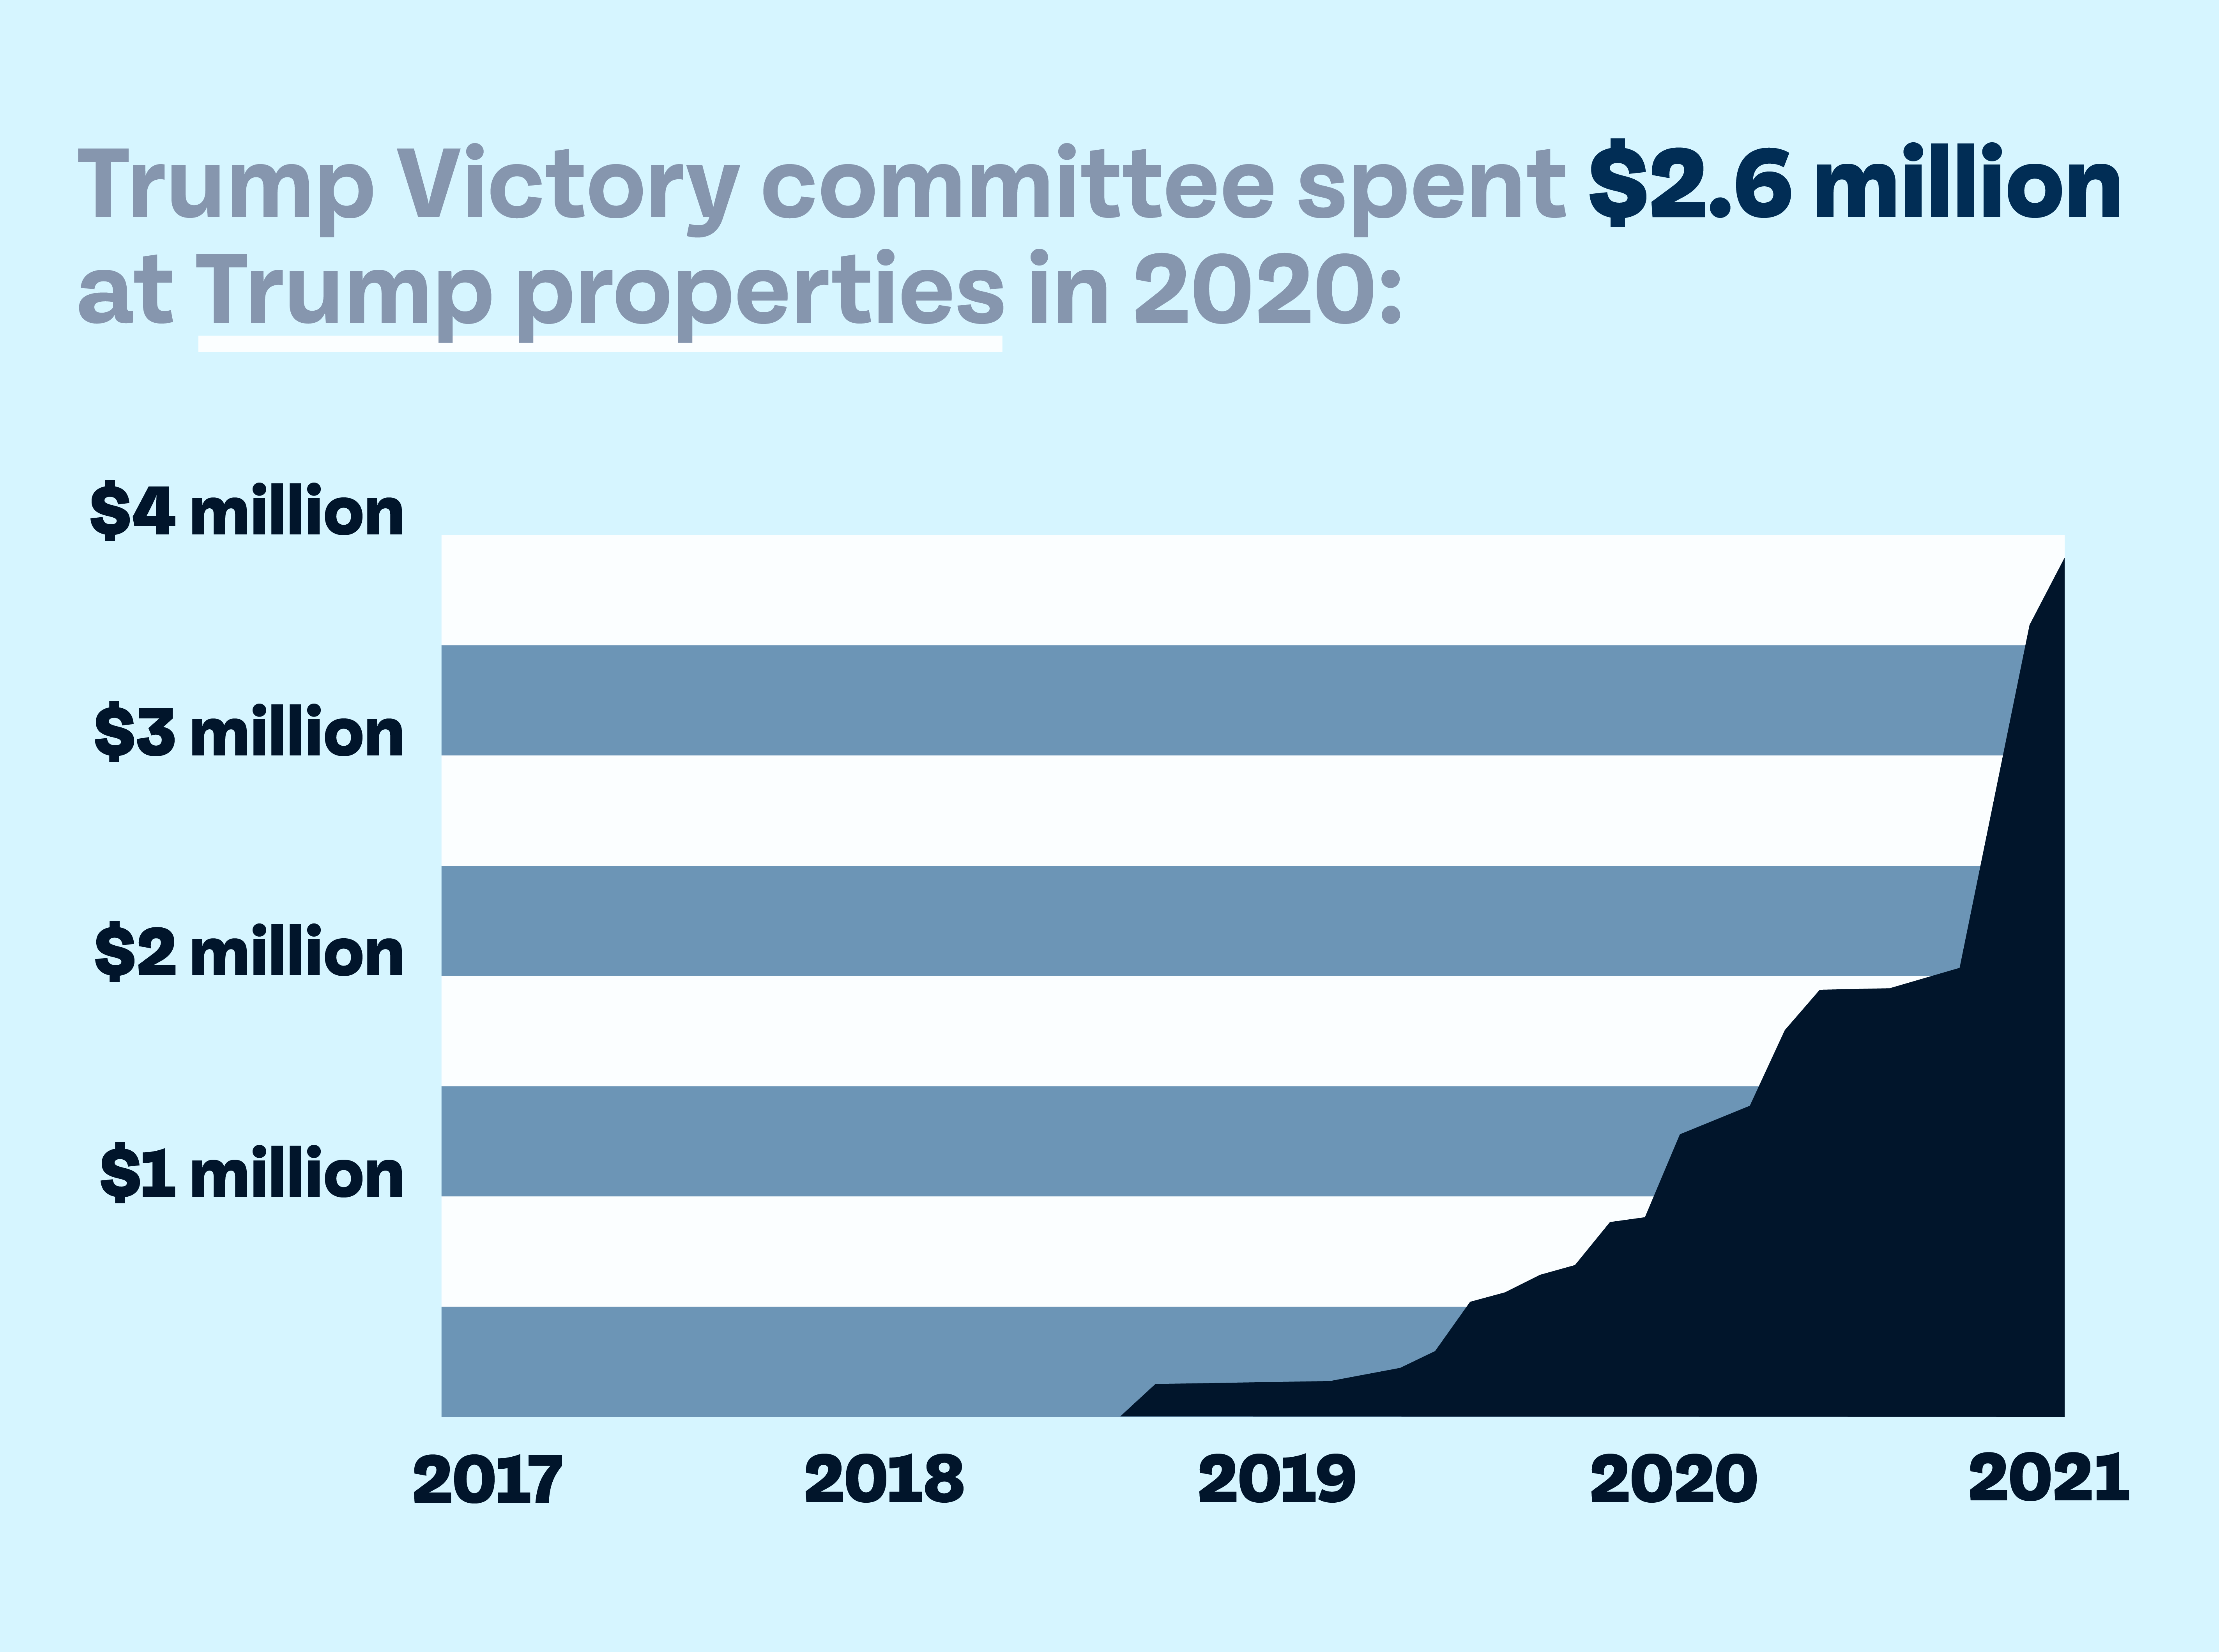 Title: "Trump Victory committee spent $2.6 million at Trump properties in 2020:" Graph of increased spending from 2017-2021 between $1 million and $4 million, especially starting in the middle of 2018.